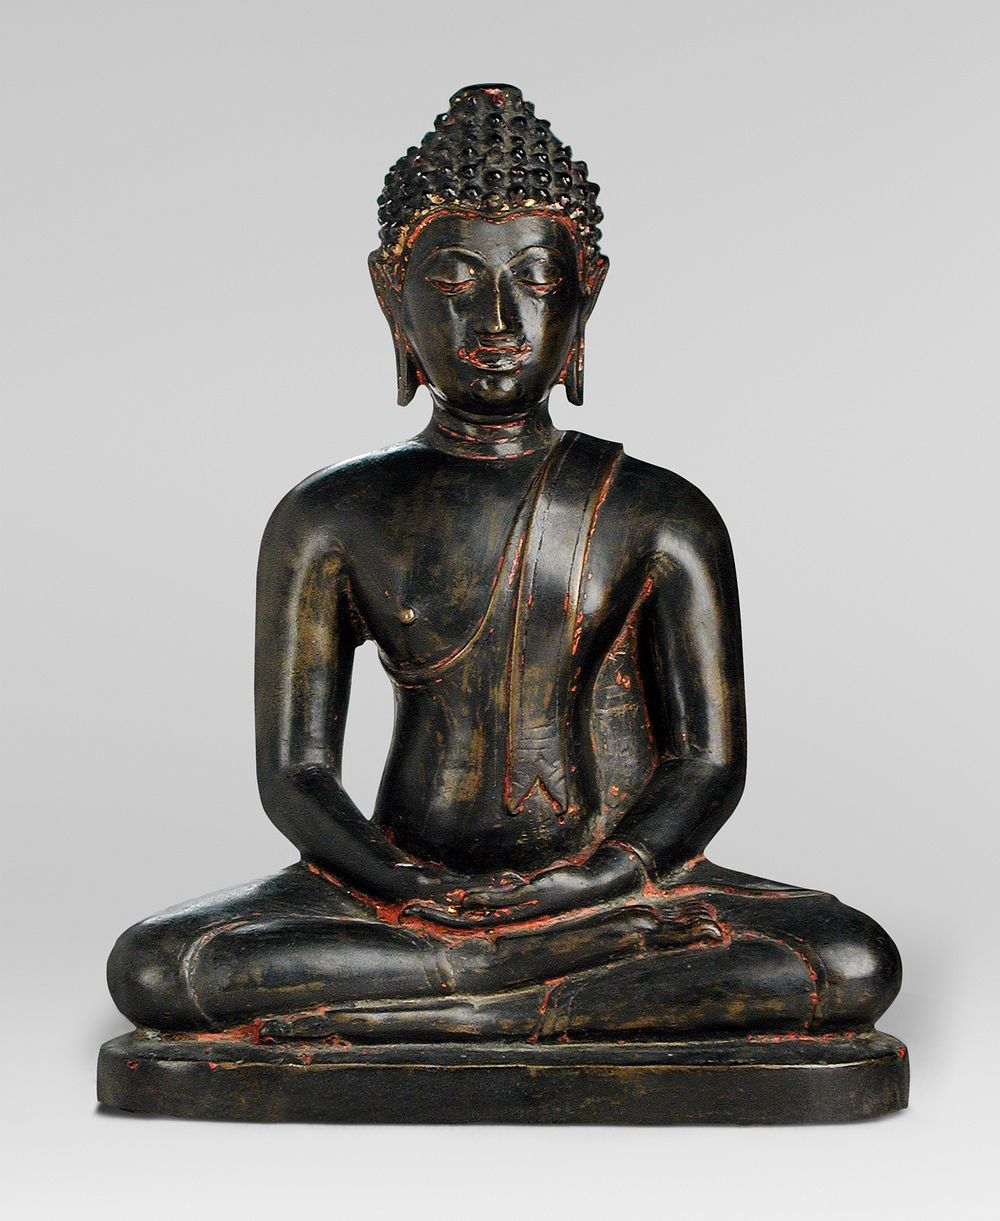 Buddha Shakyamuni sculpture during 15th century Original from the Los Angeles County Museum of Art. Digitally enhanced by…